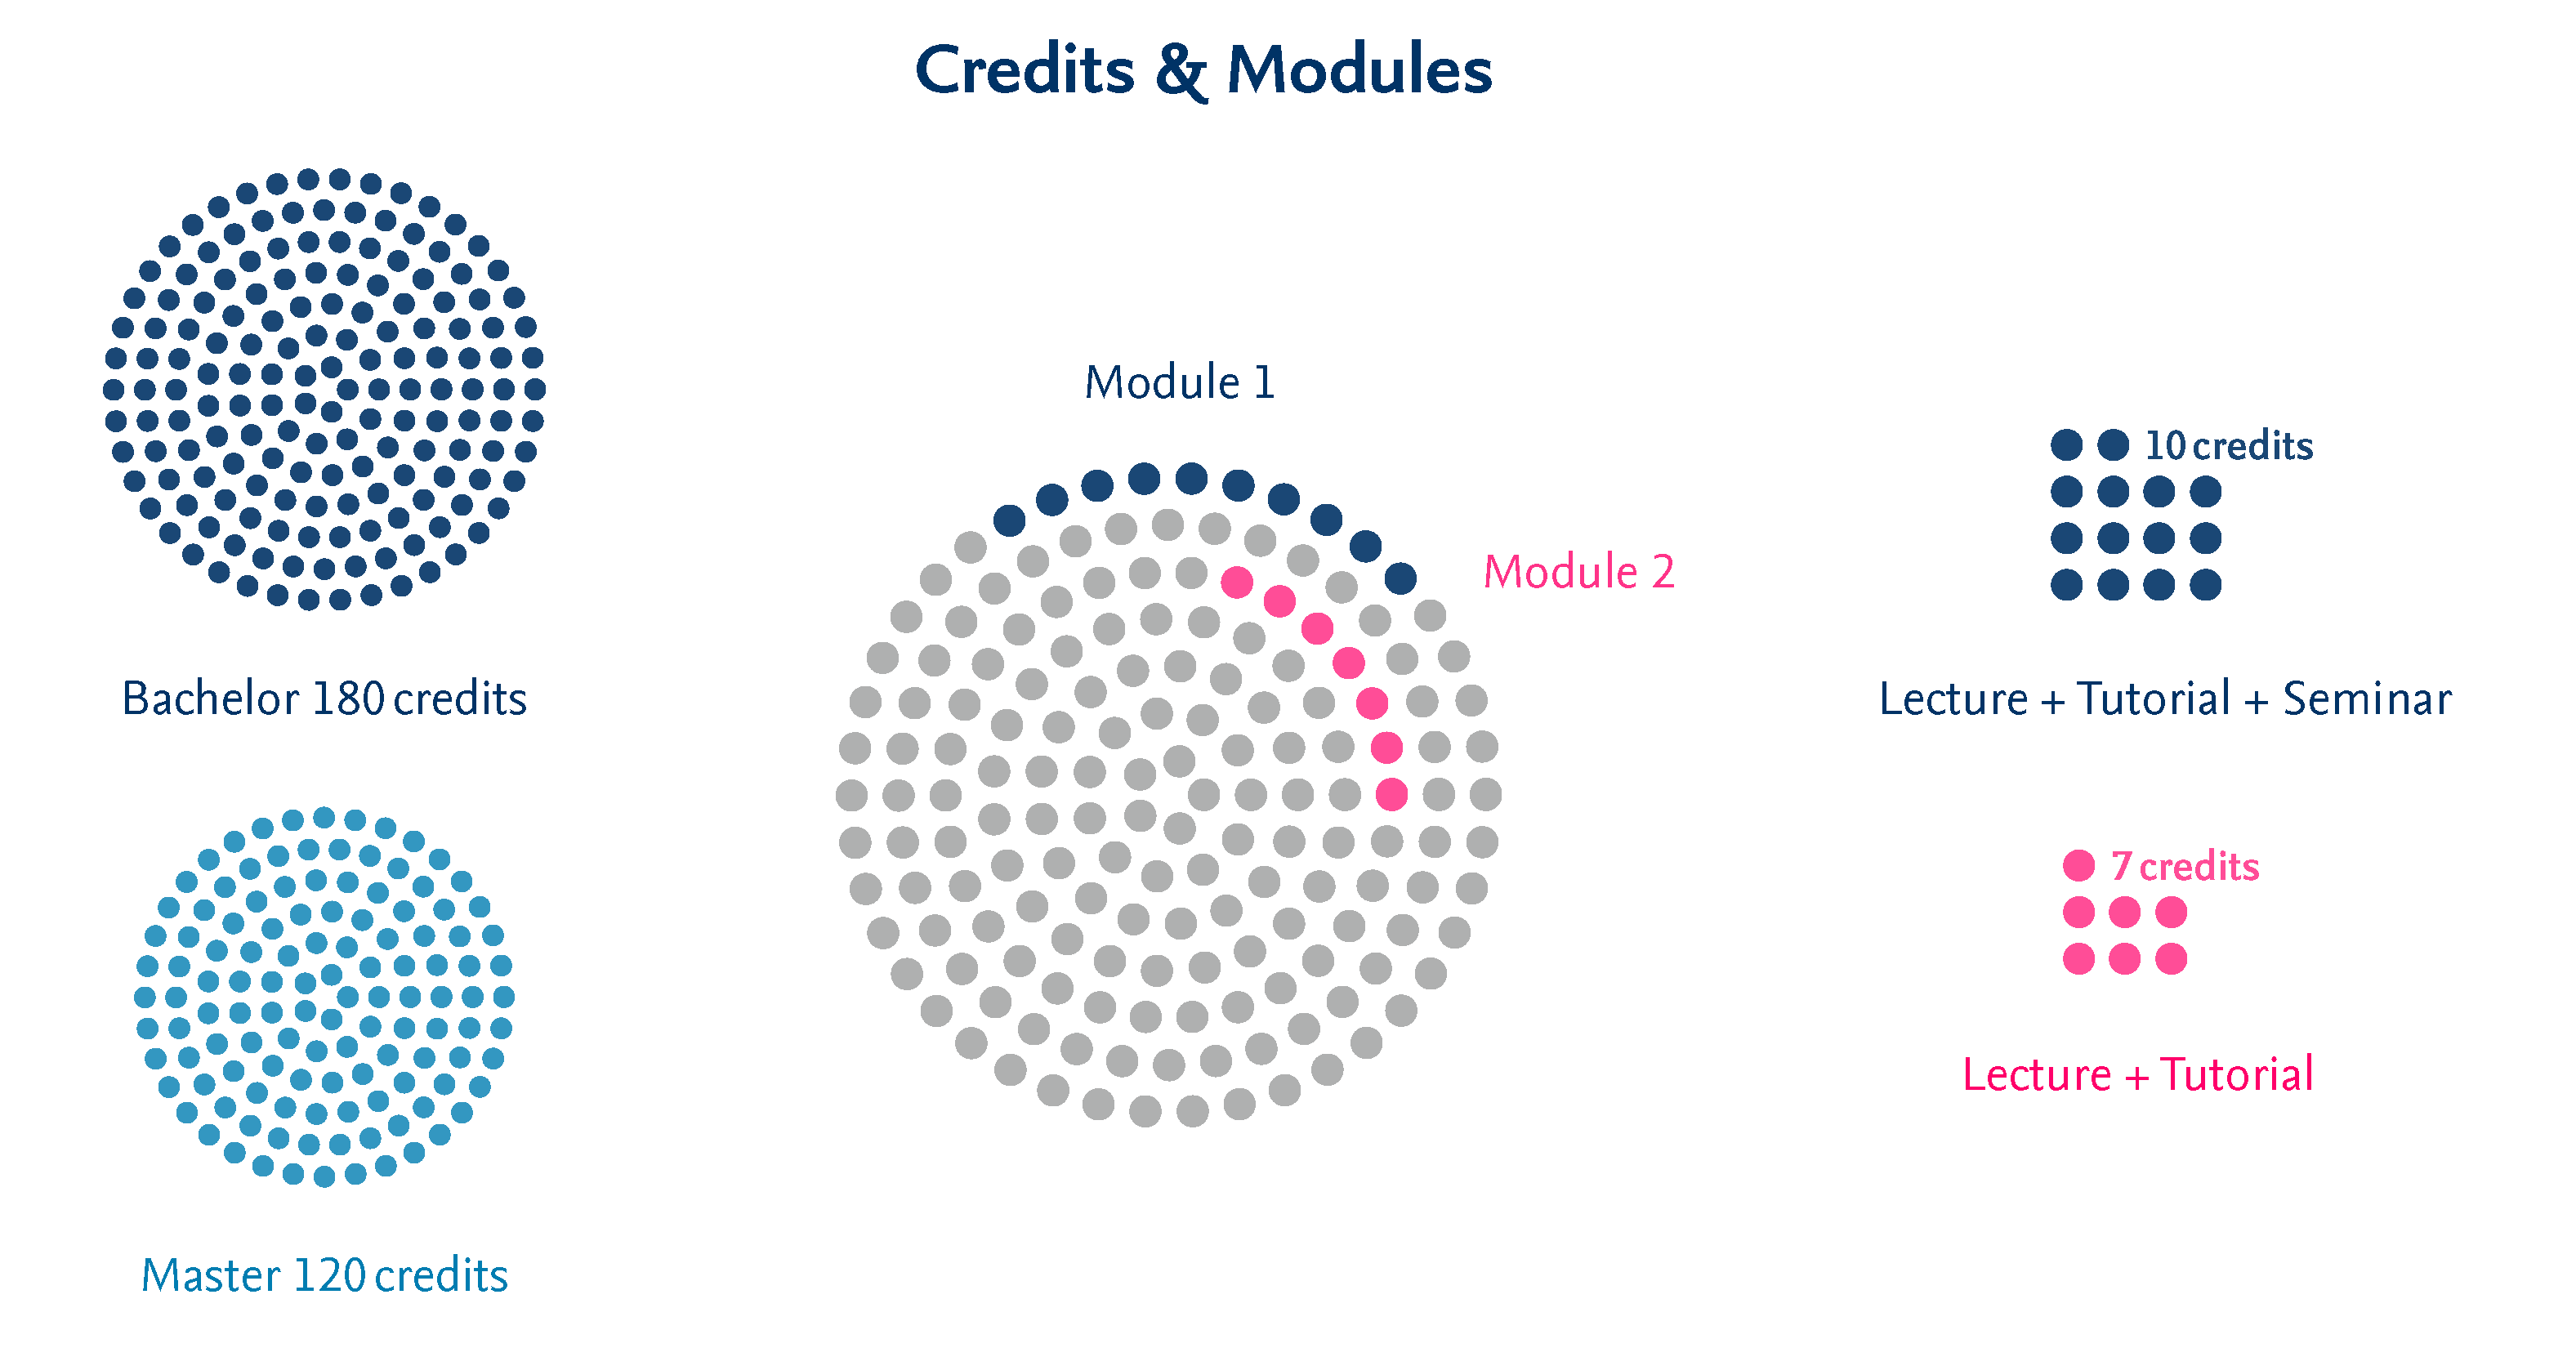 Credit points and modules